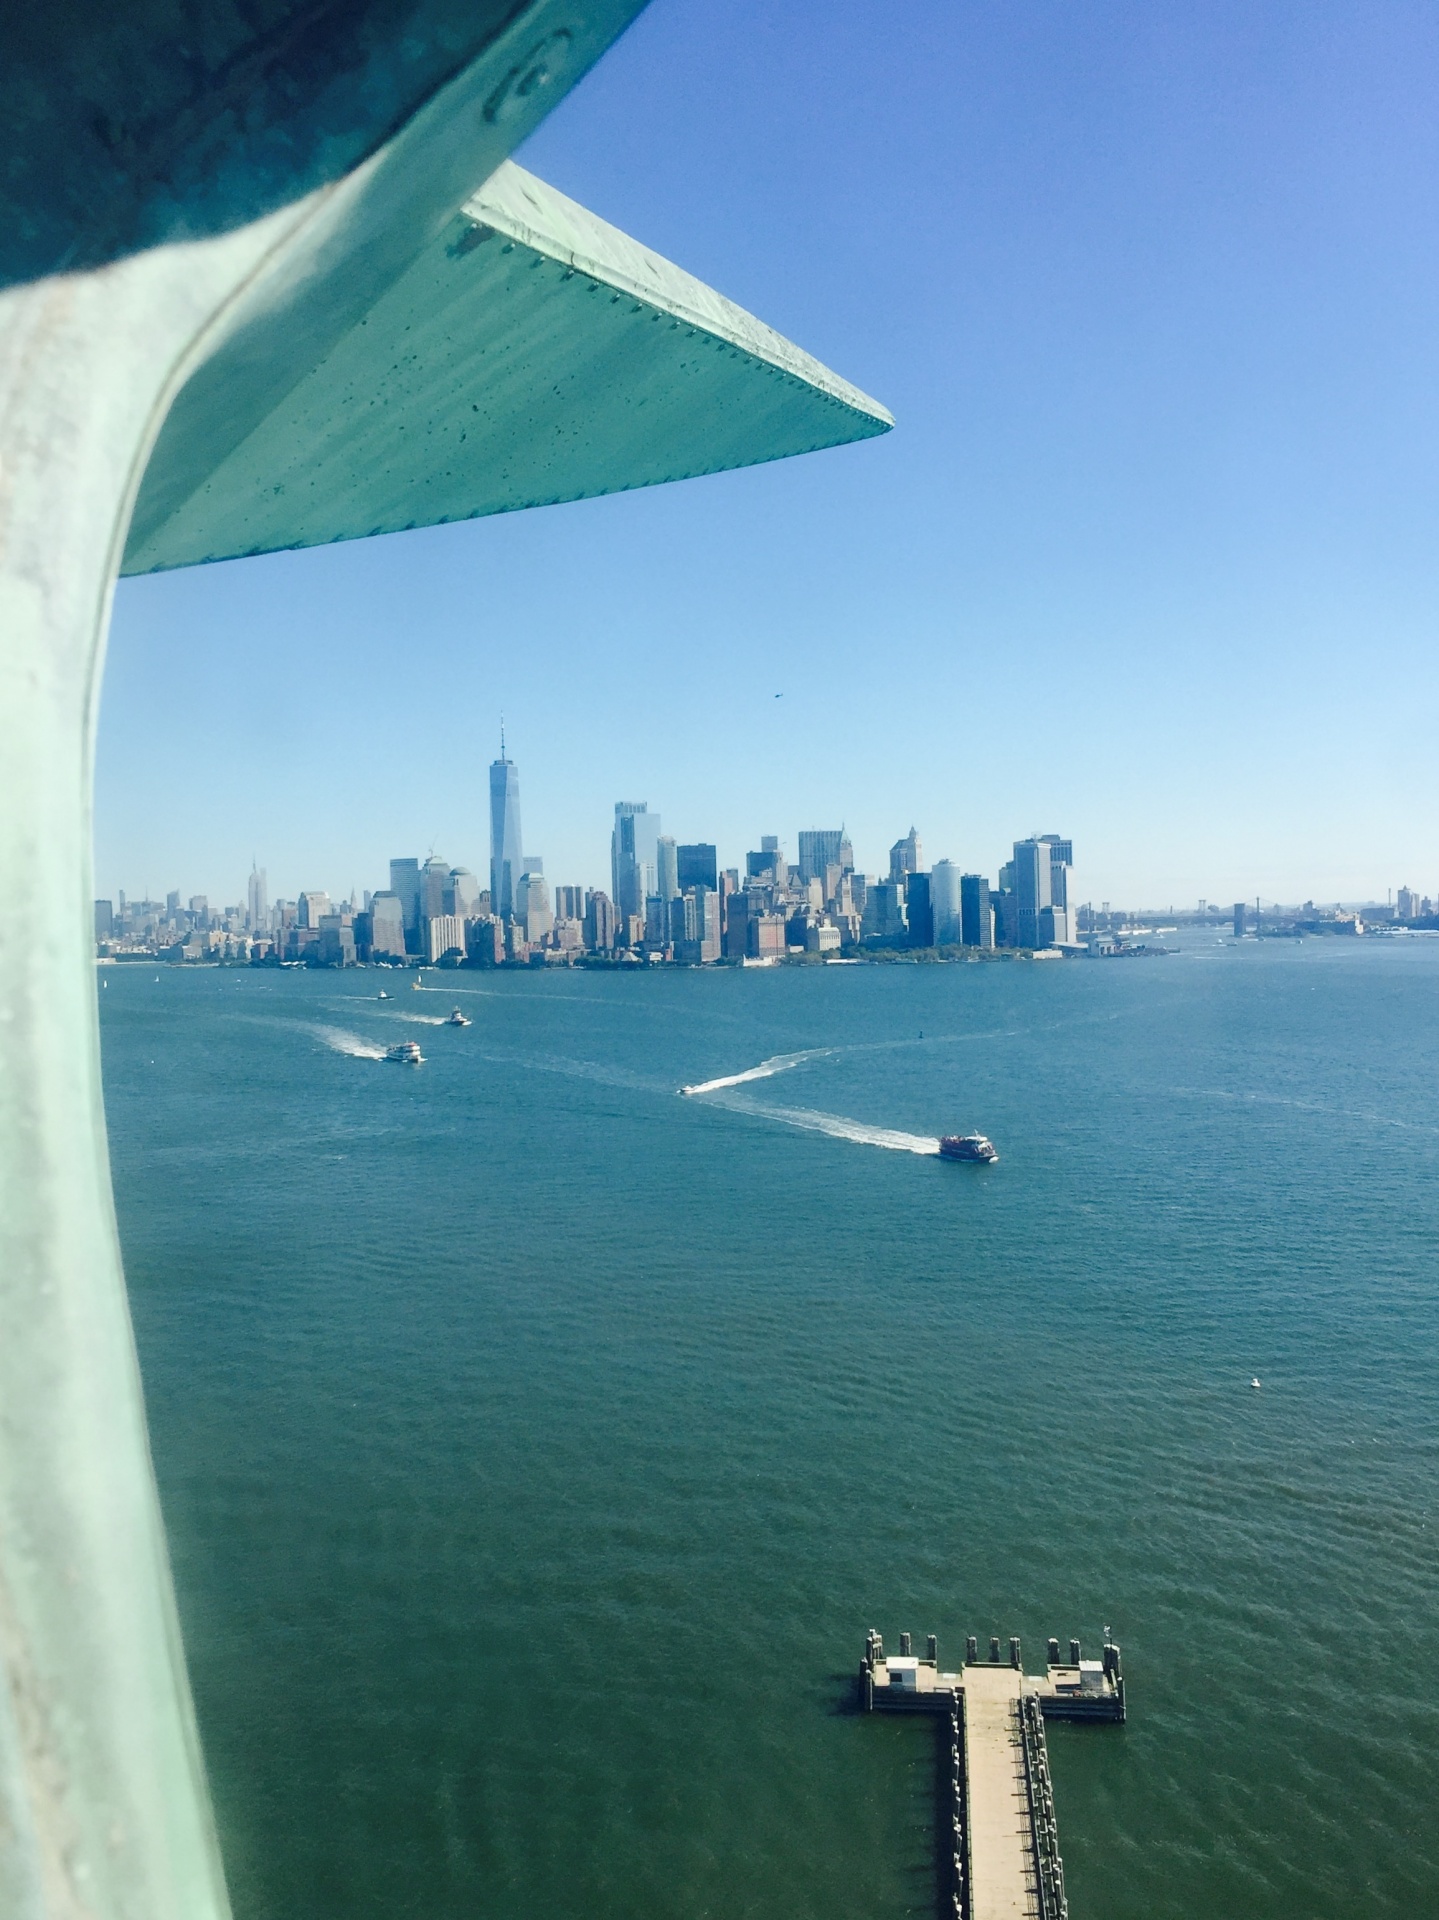 A photo taken from inside the crown of the Statue of Liberty looking East towards New York City